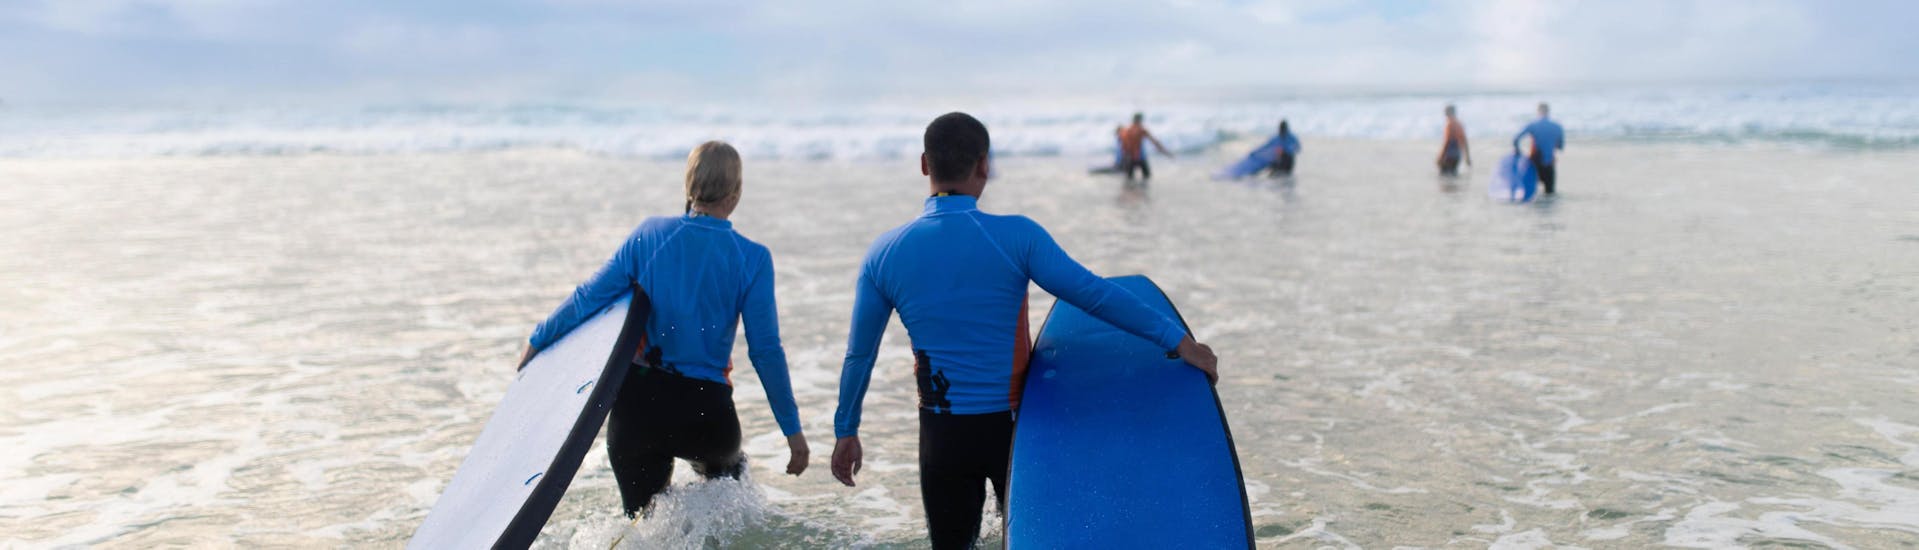 private-surf-lessons-in-gold-coast-get-wet-surf-school